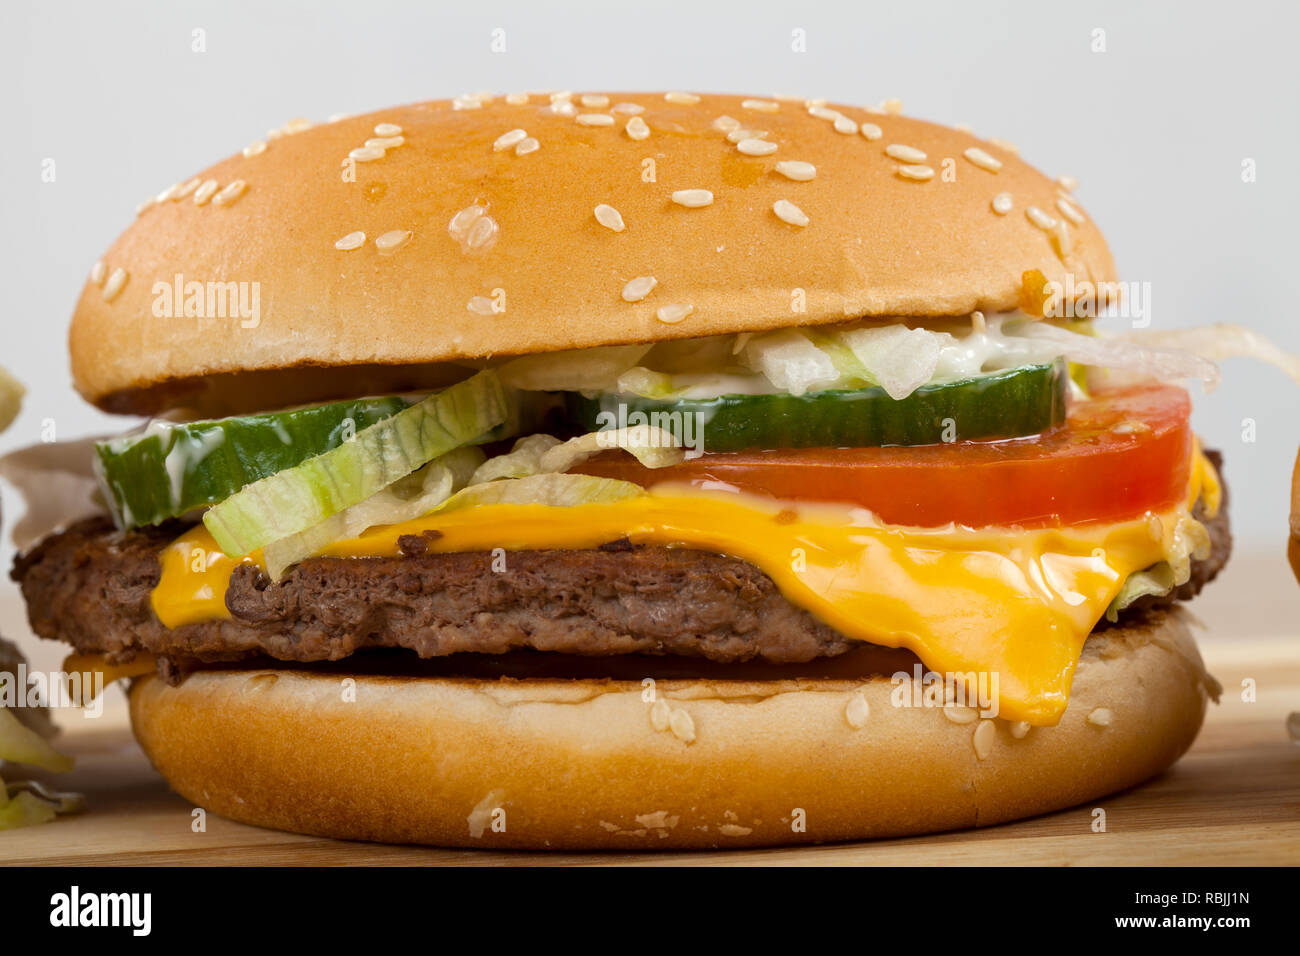 Close up picture of a tasty double cheeseburger with beef, cheddar, lettuce in a sesame bun Stock Photo